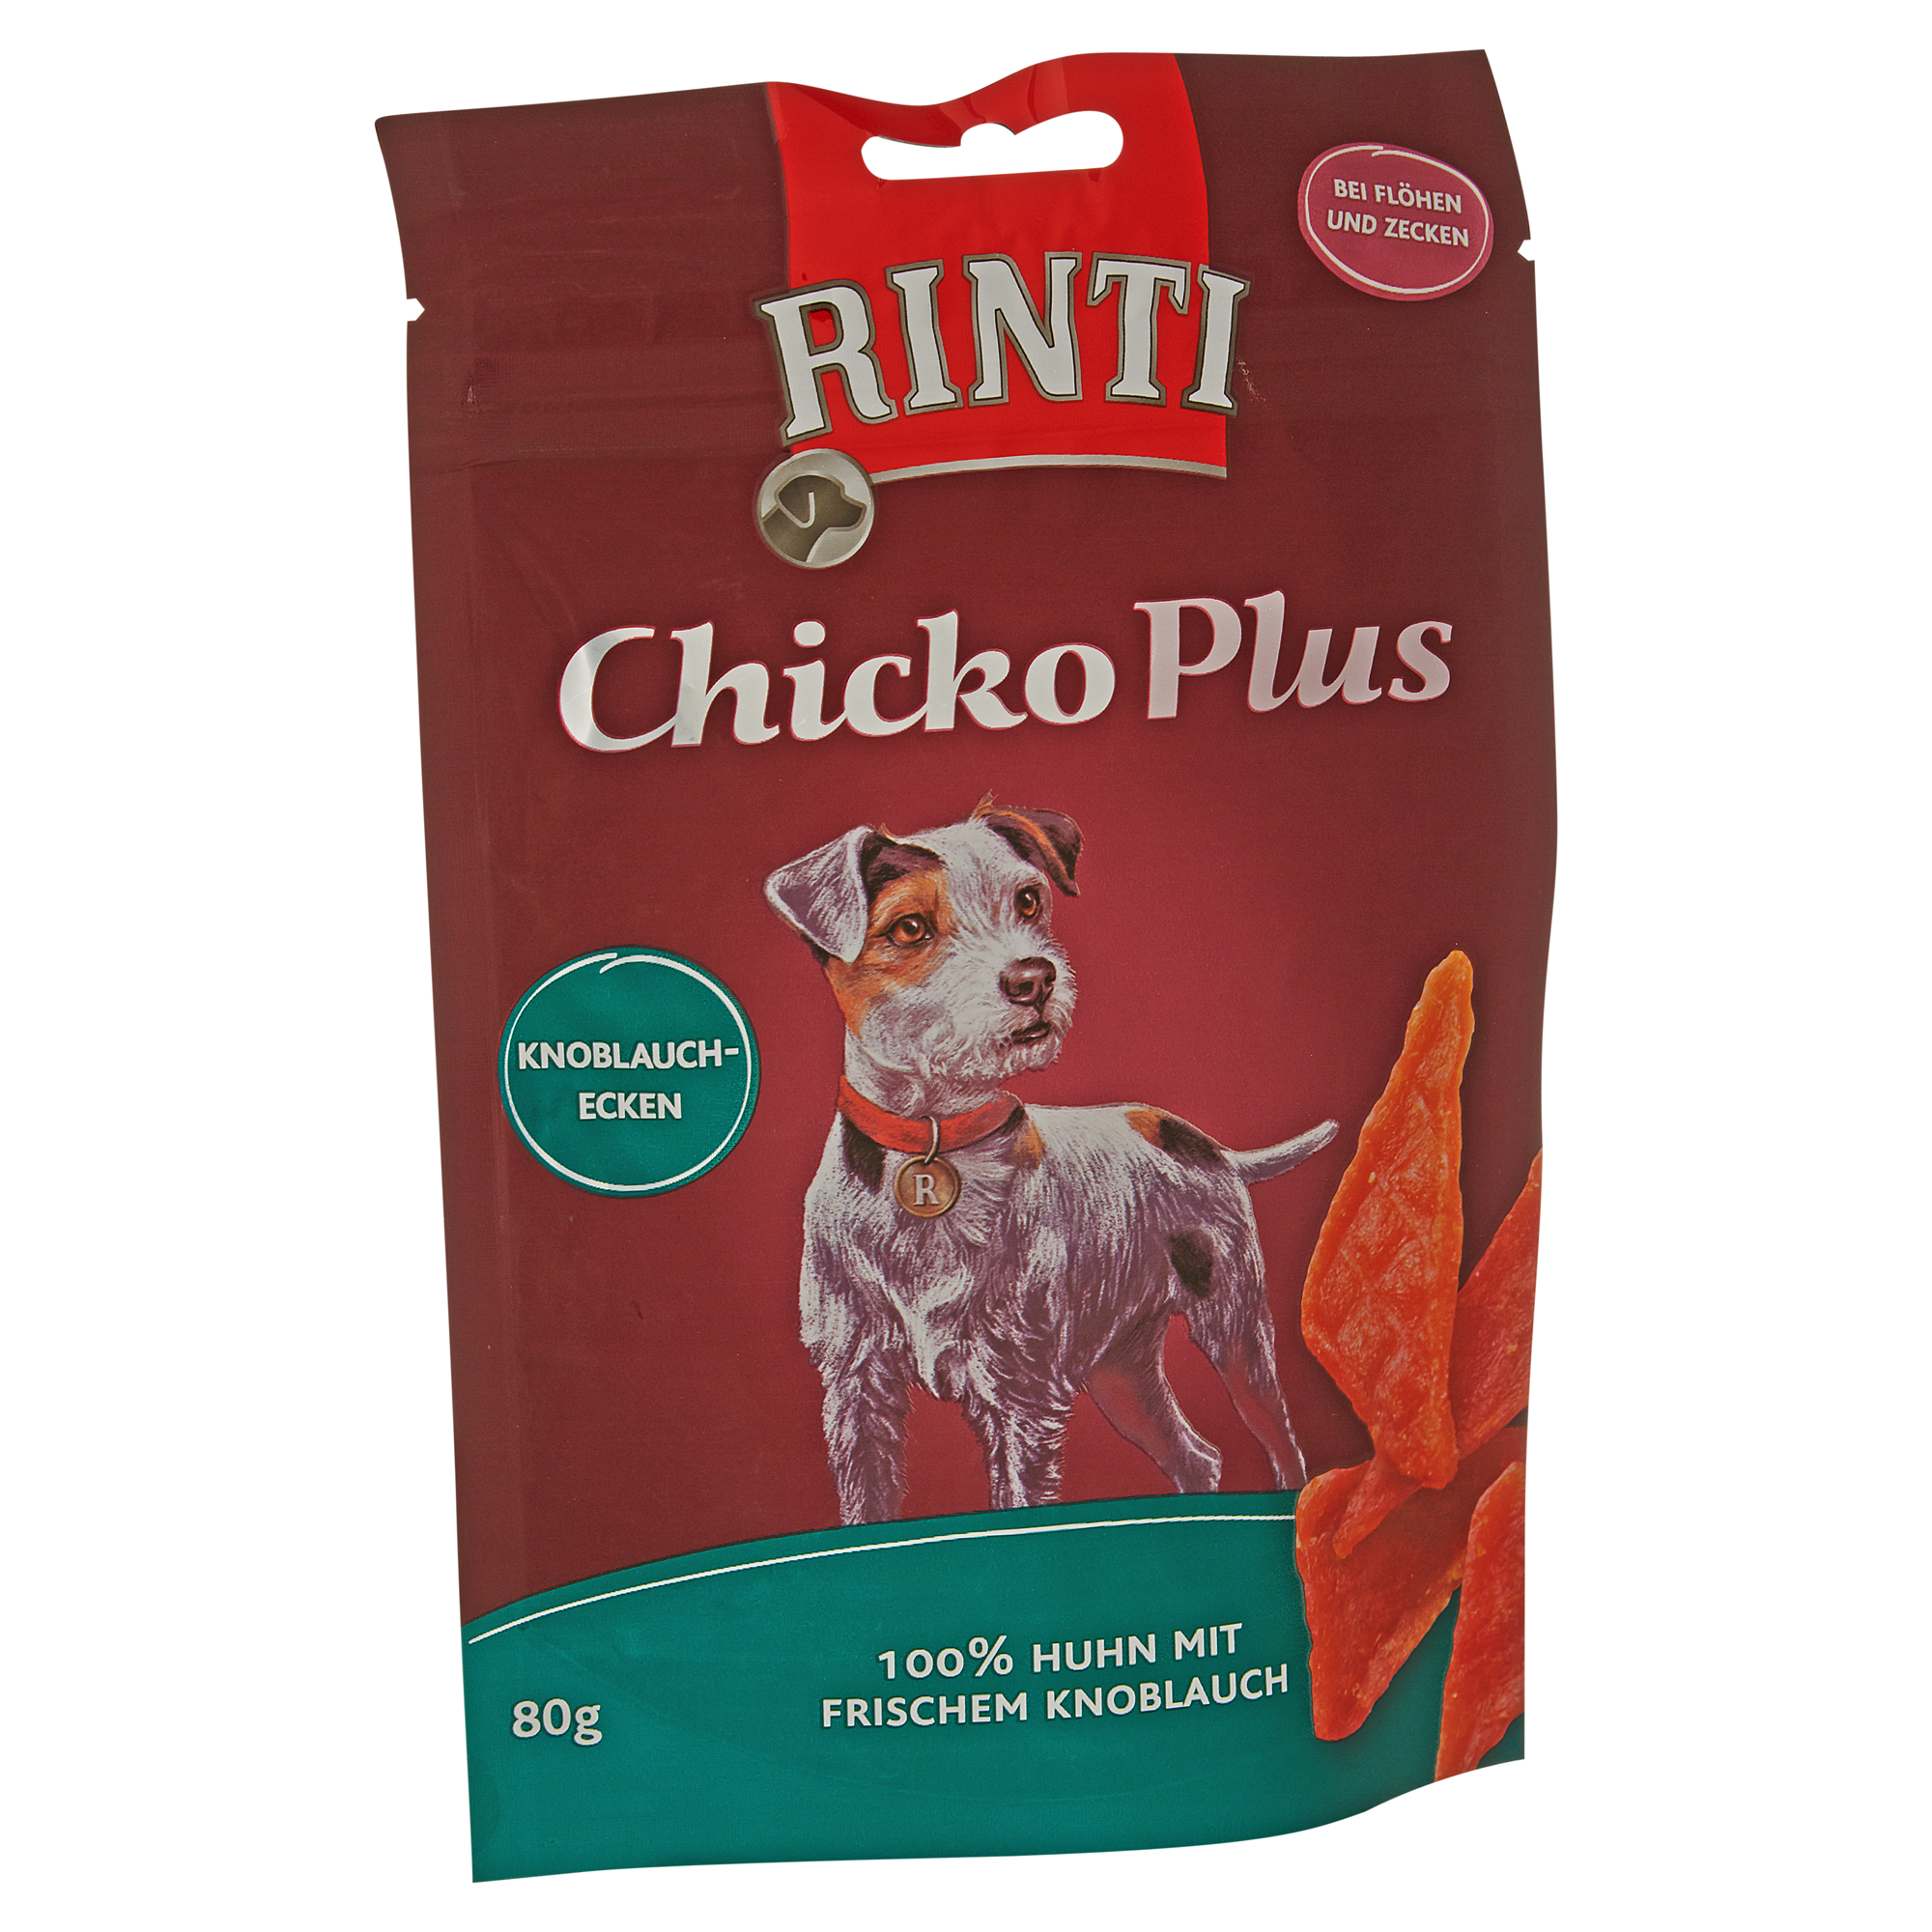 Hundesnack "Chicko" Plus Knoblauchecken mit Huhn 80 g + product picture